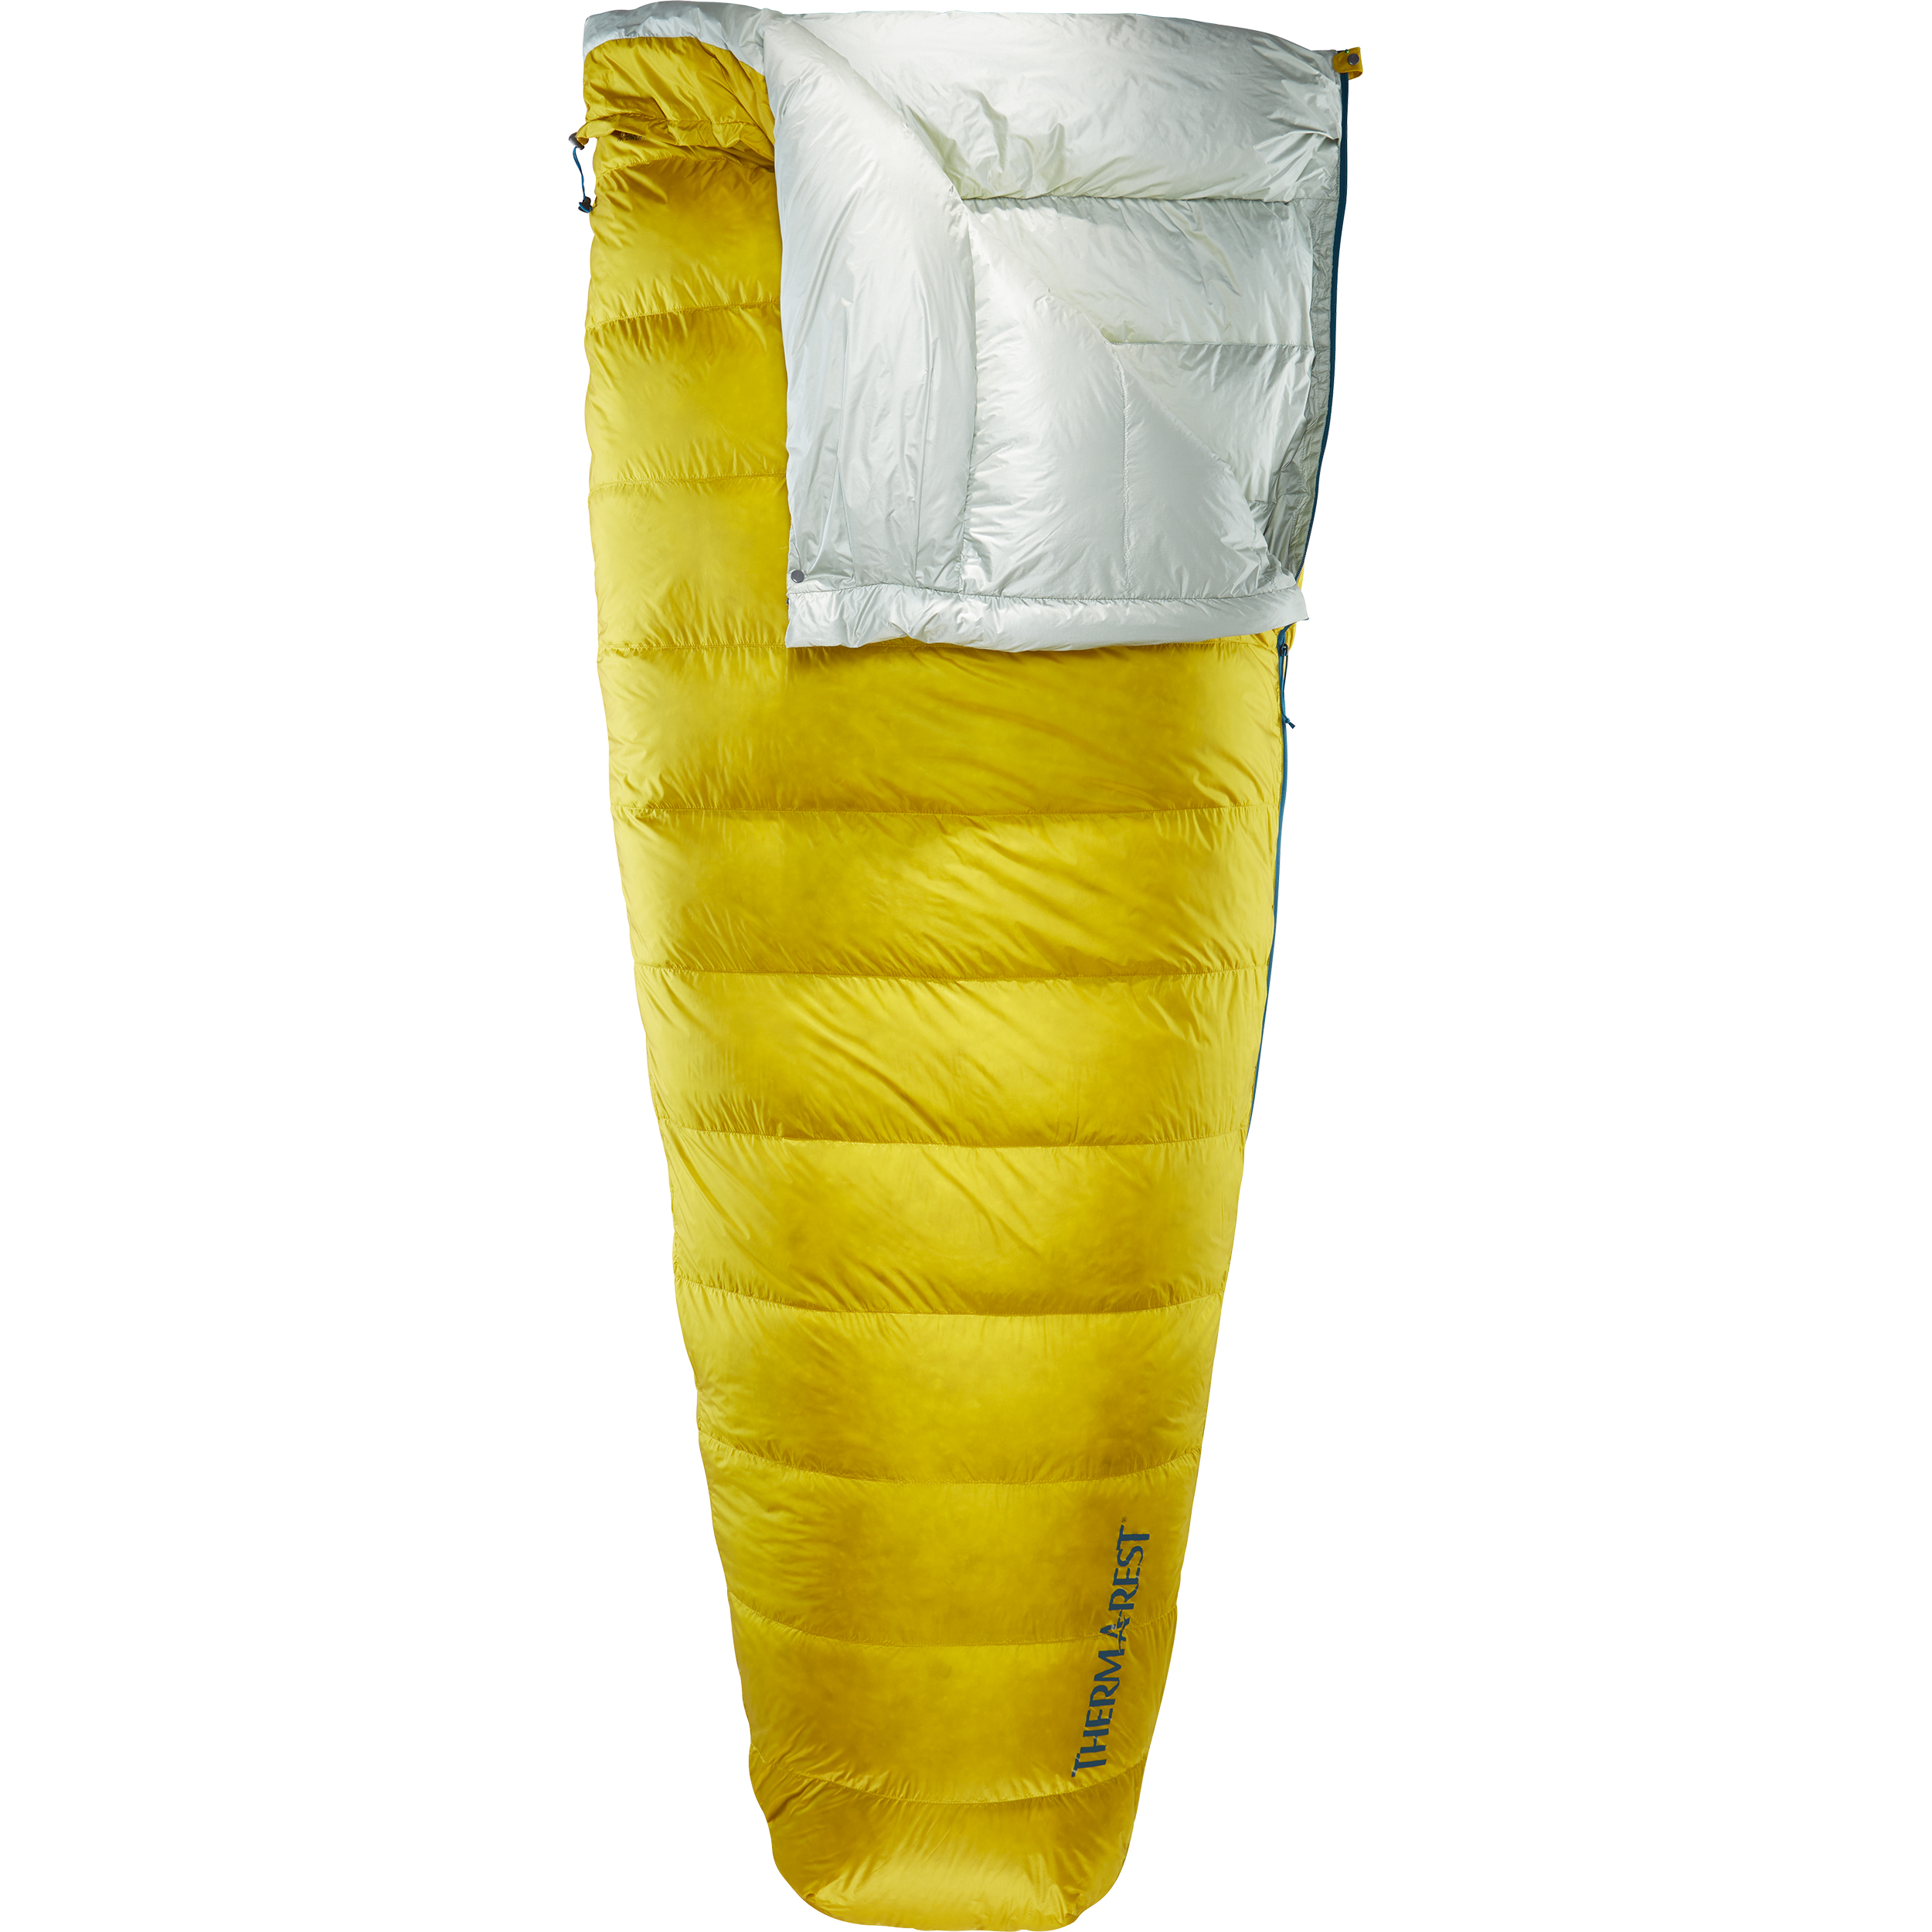 Ohm 32f 0c Sleeping Bag Fast Light Therm A Rest